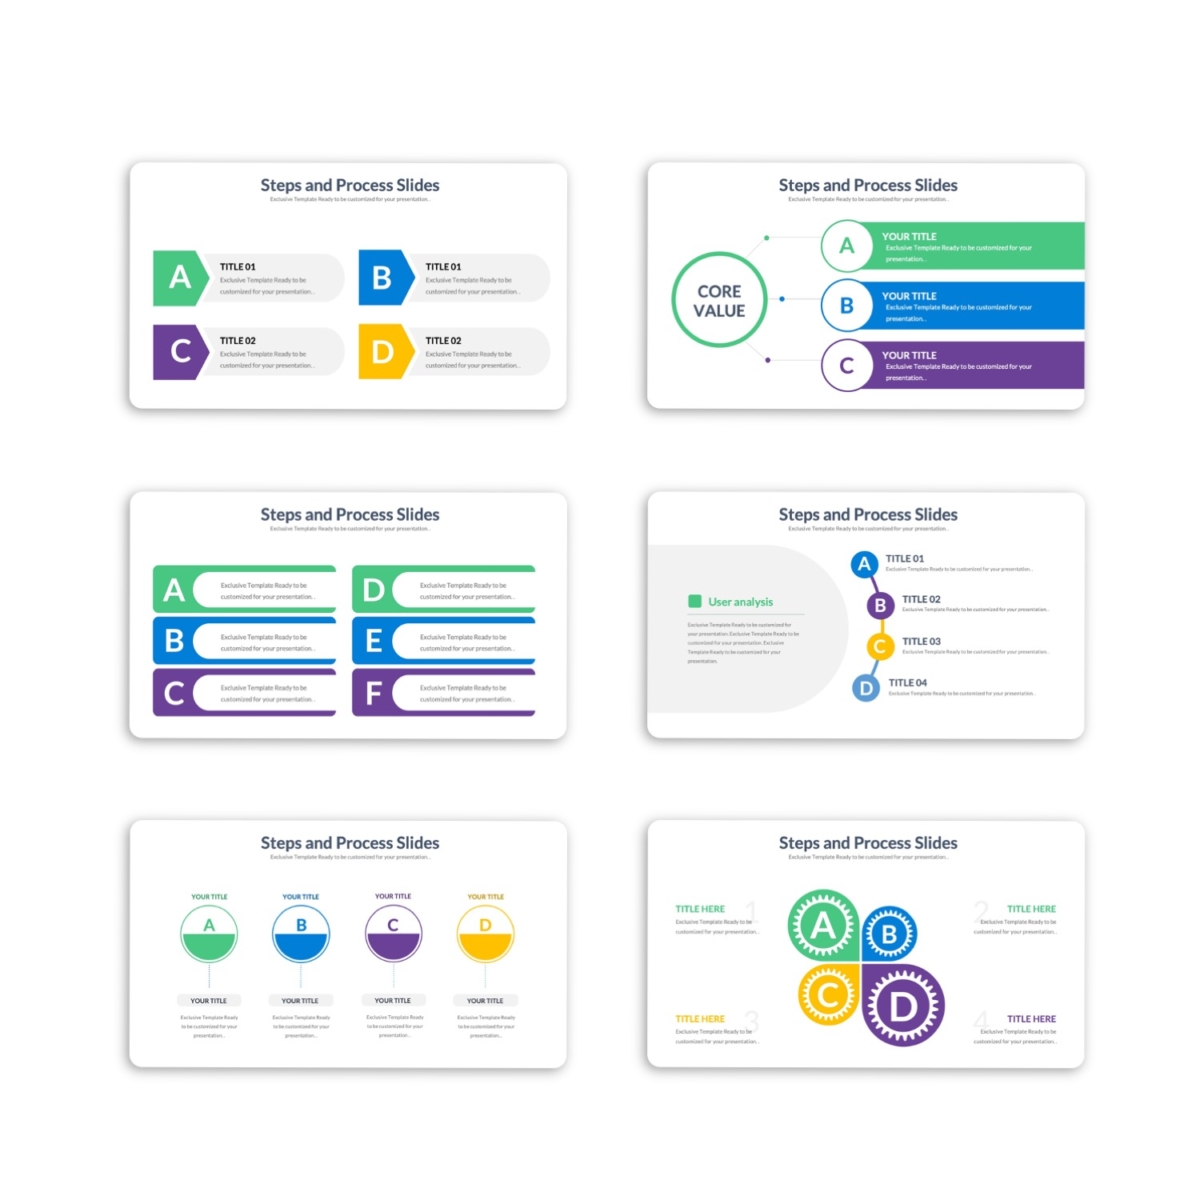 Steps and Process Slides Template